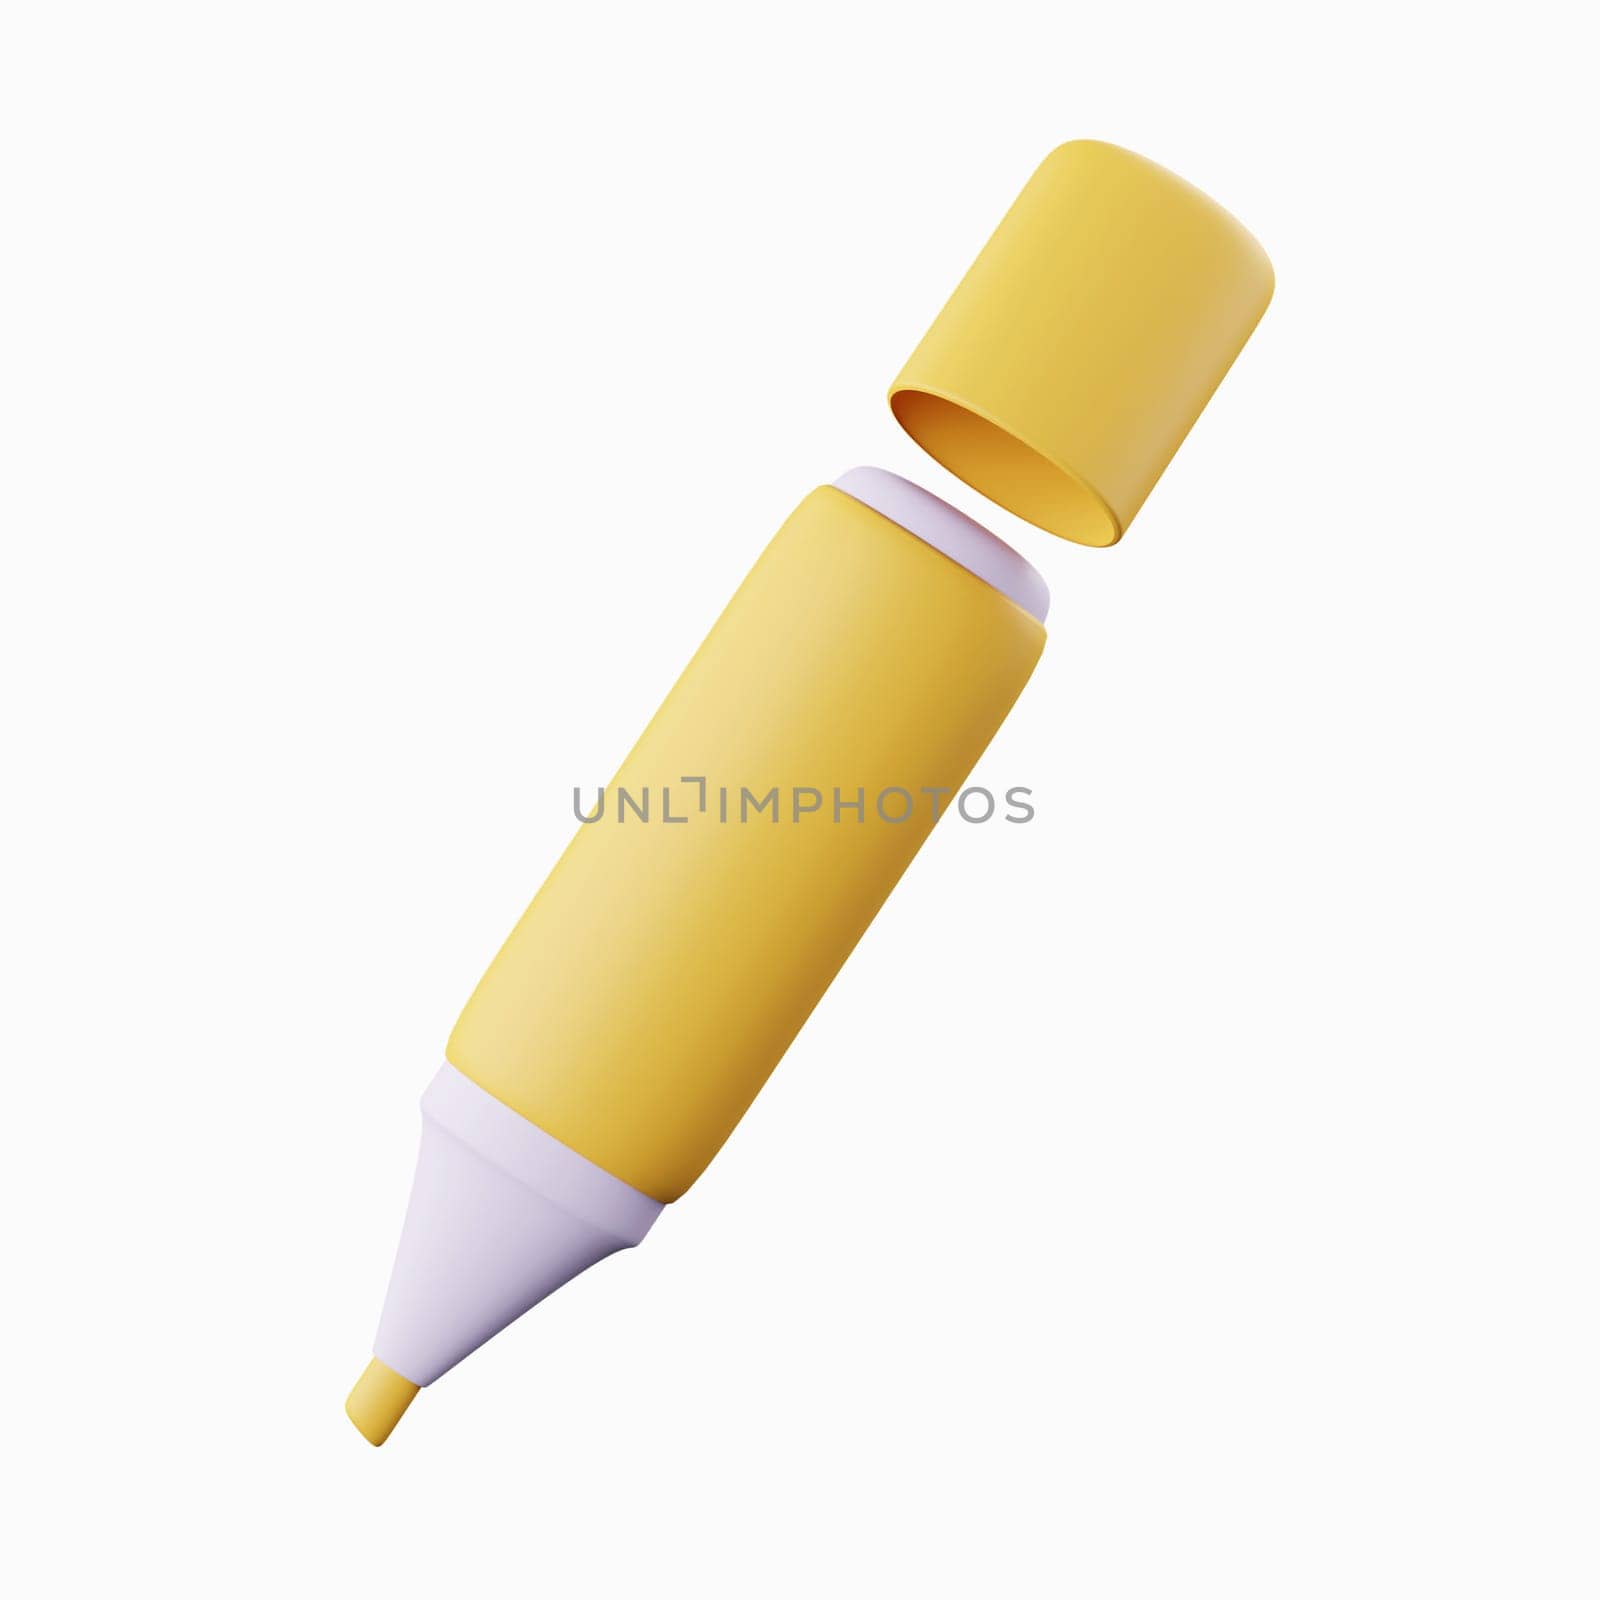 3d marker pen for education, school and work. icon isolated on background, icon symbol clipping path. 3d render illustration.